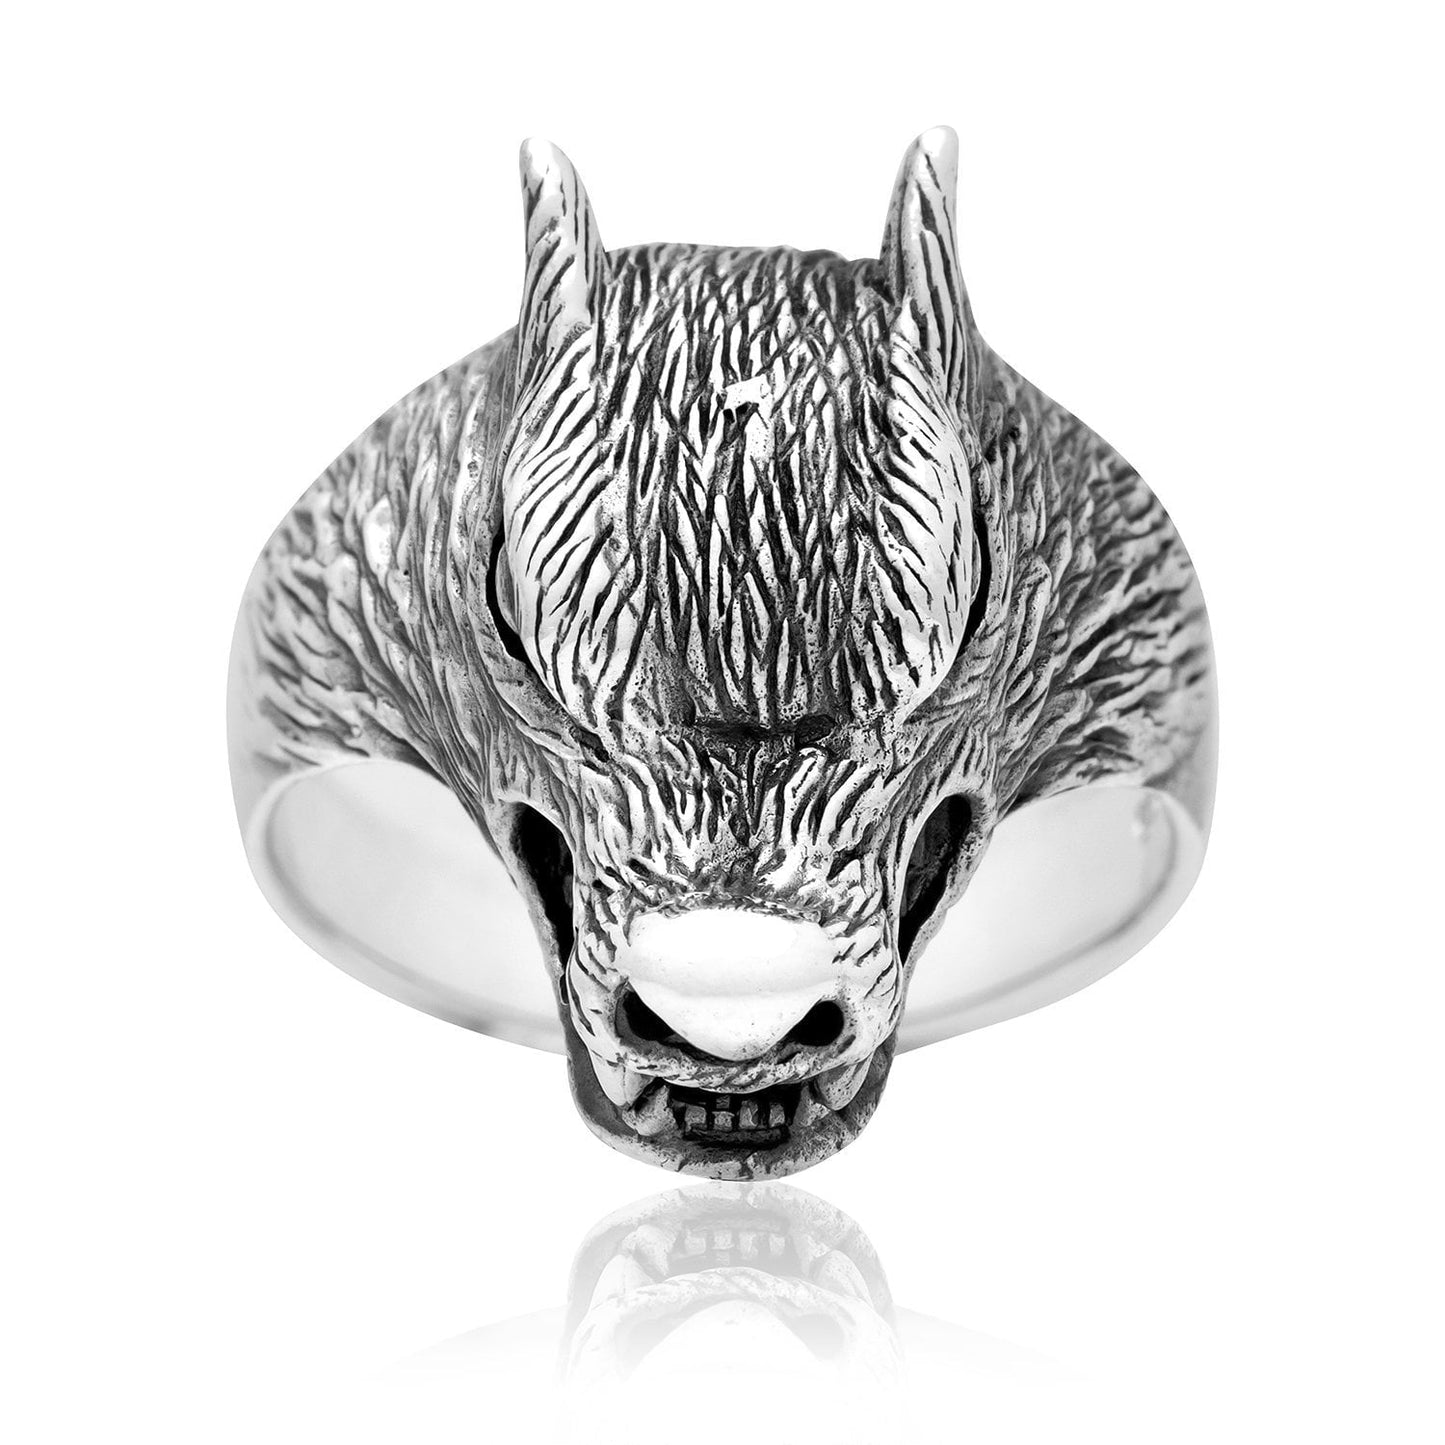 925 Sterling Silver Viking Legendary Wolf Ring - SilverMania925